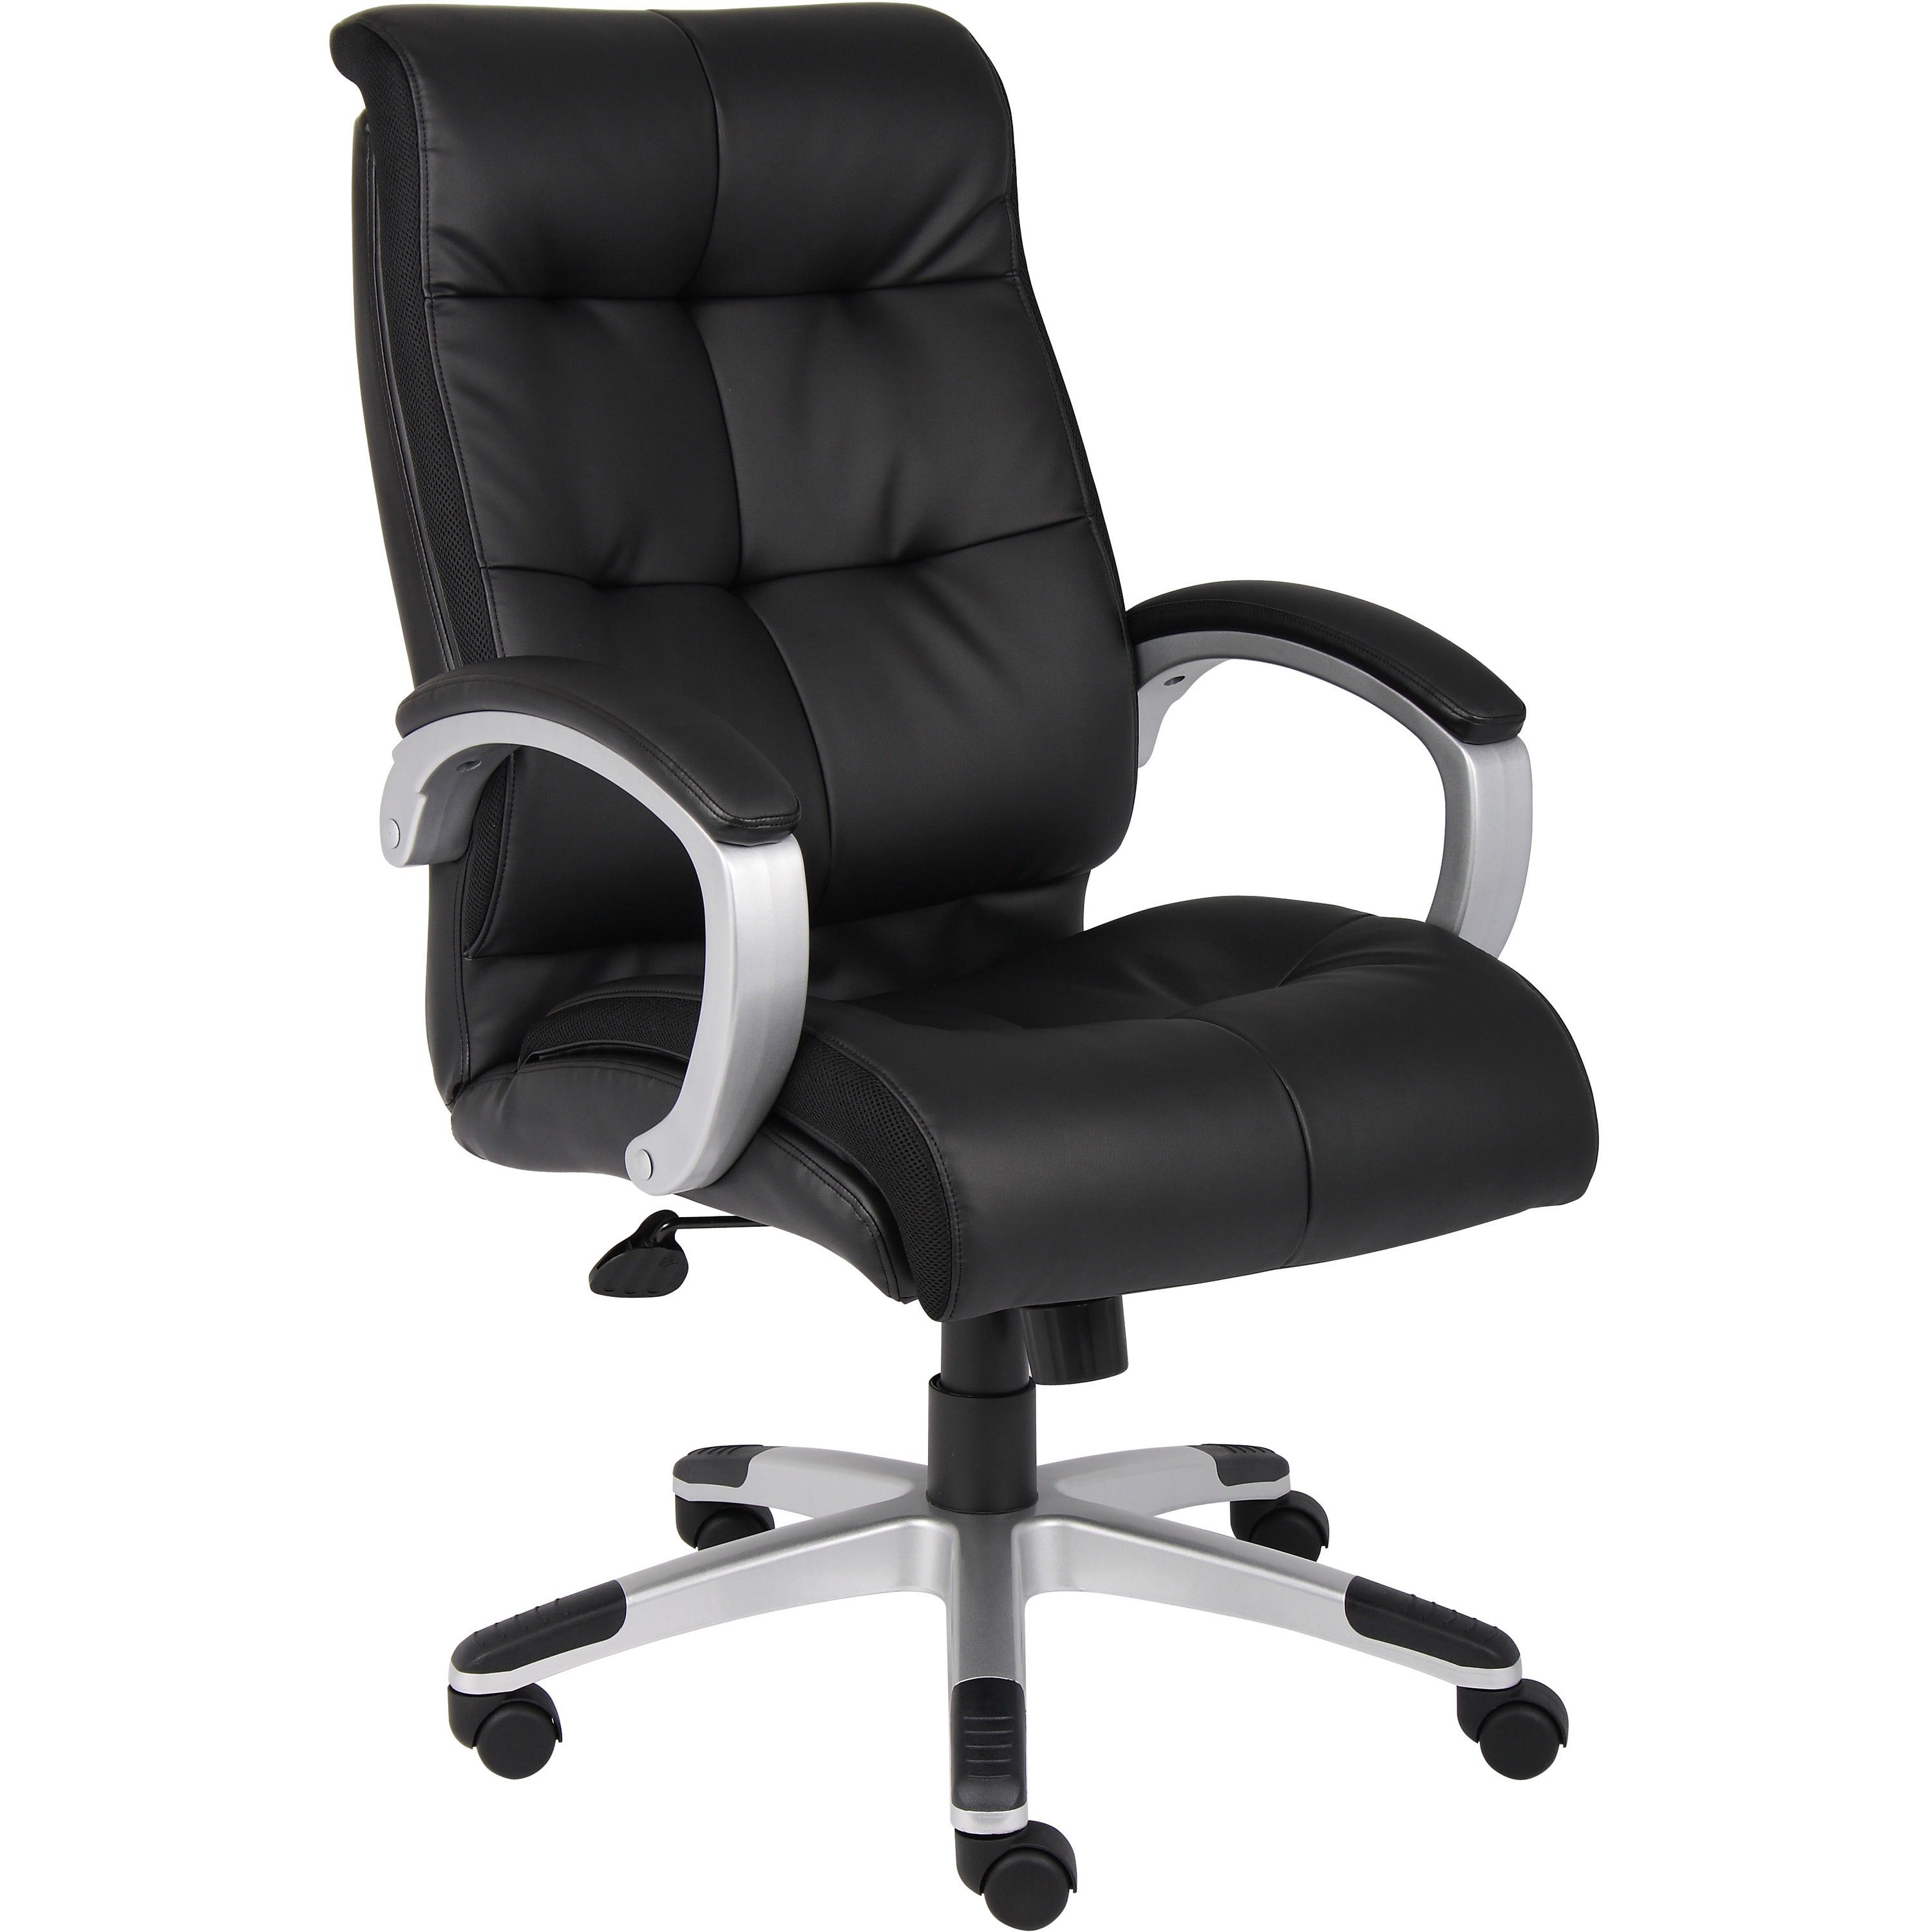 Lorell Classic Executive Office Chair - Black Leather Seat - 5-star Base - Black - 1 Each - 